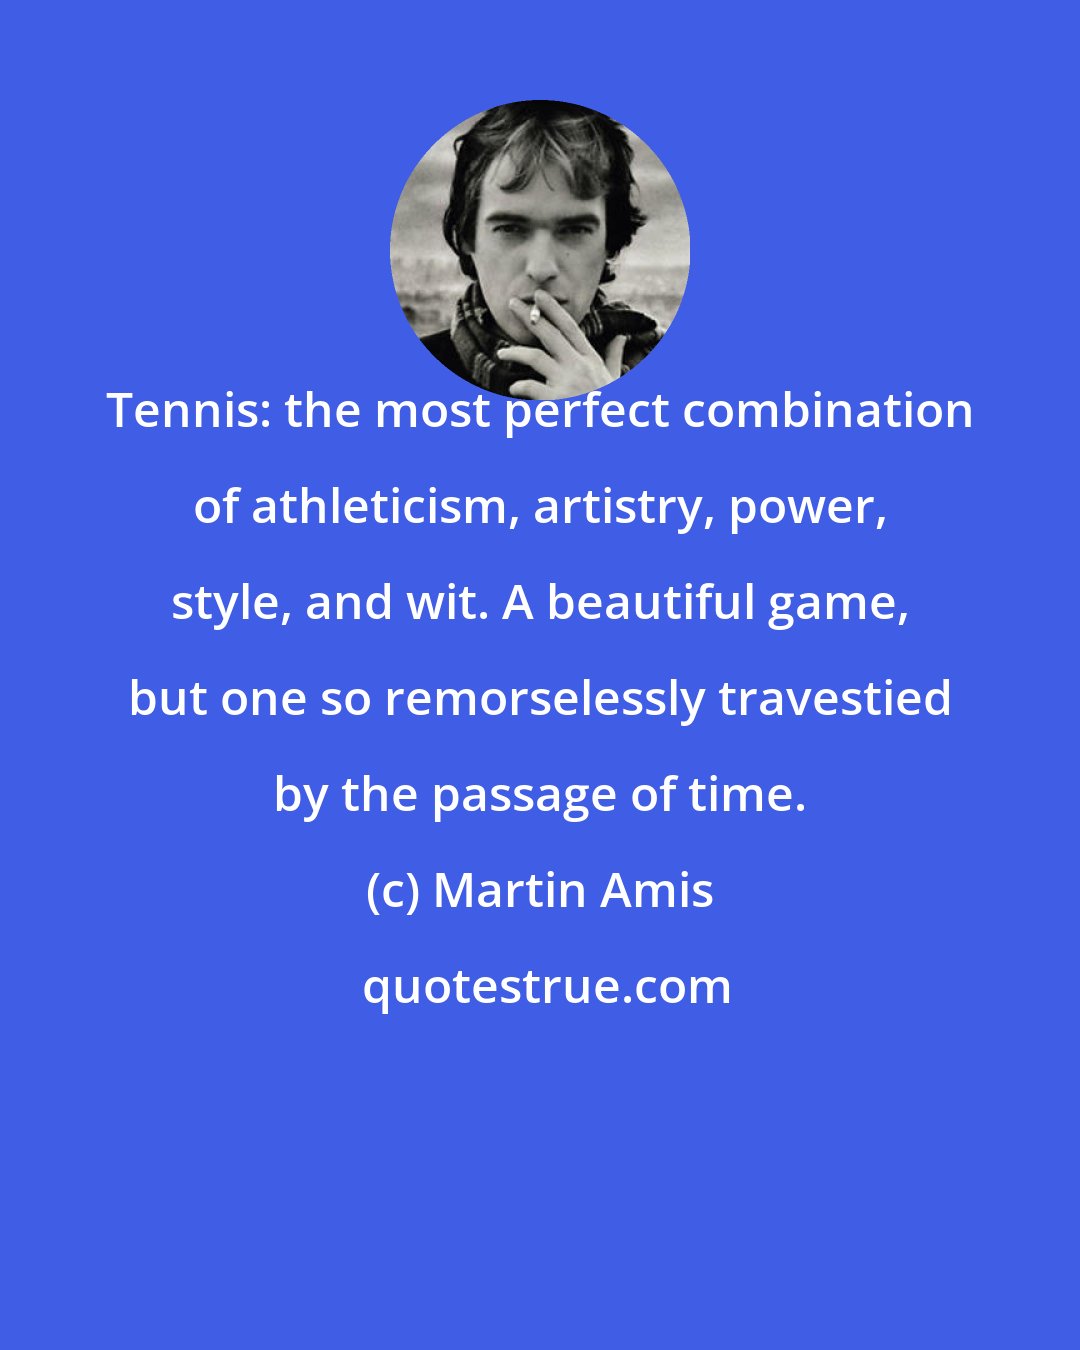 Martin Amis: Tennis: the most perfect combination of athleticism, artistry, power, style, and wit. A beautiful game, but one so remorselessly travestied by the passage of time.